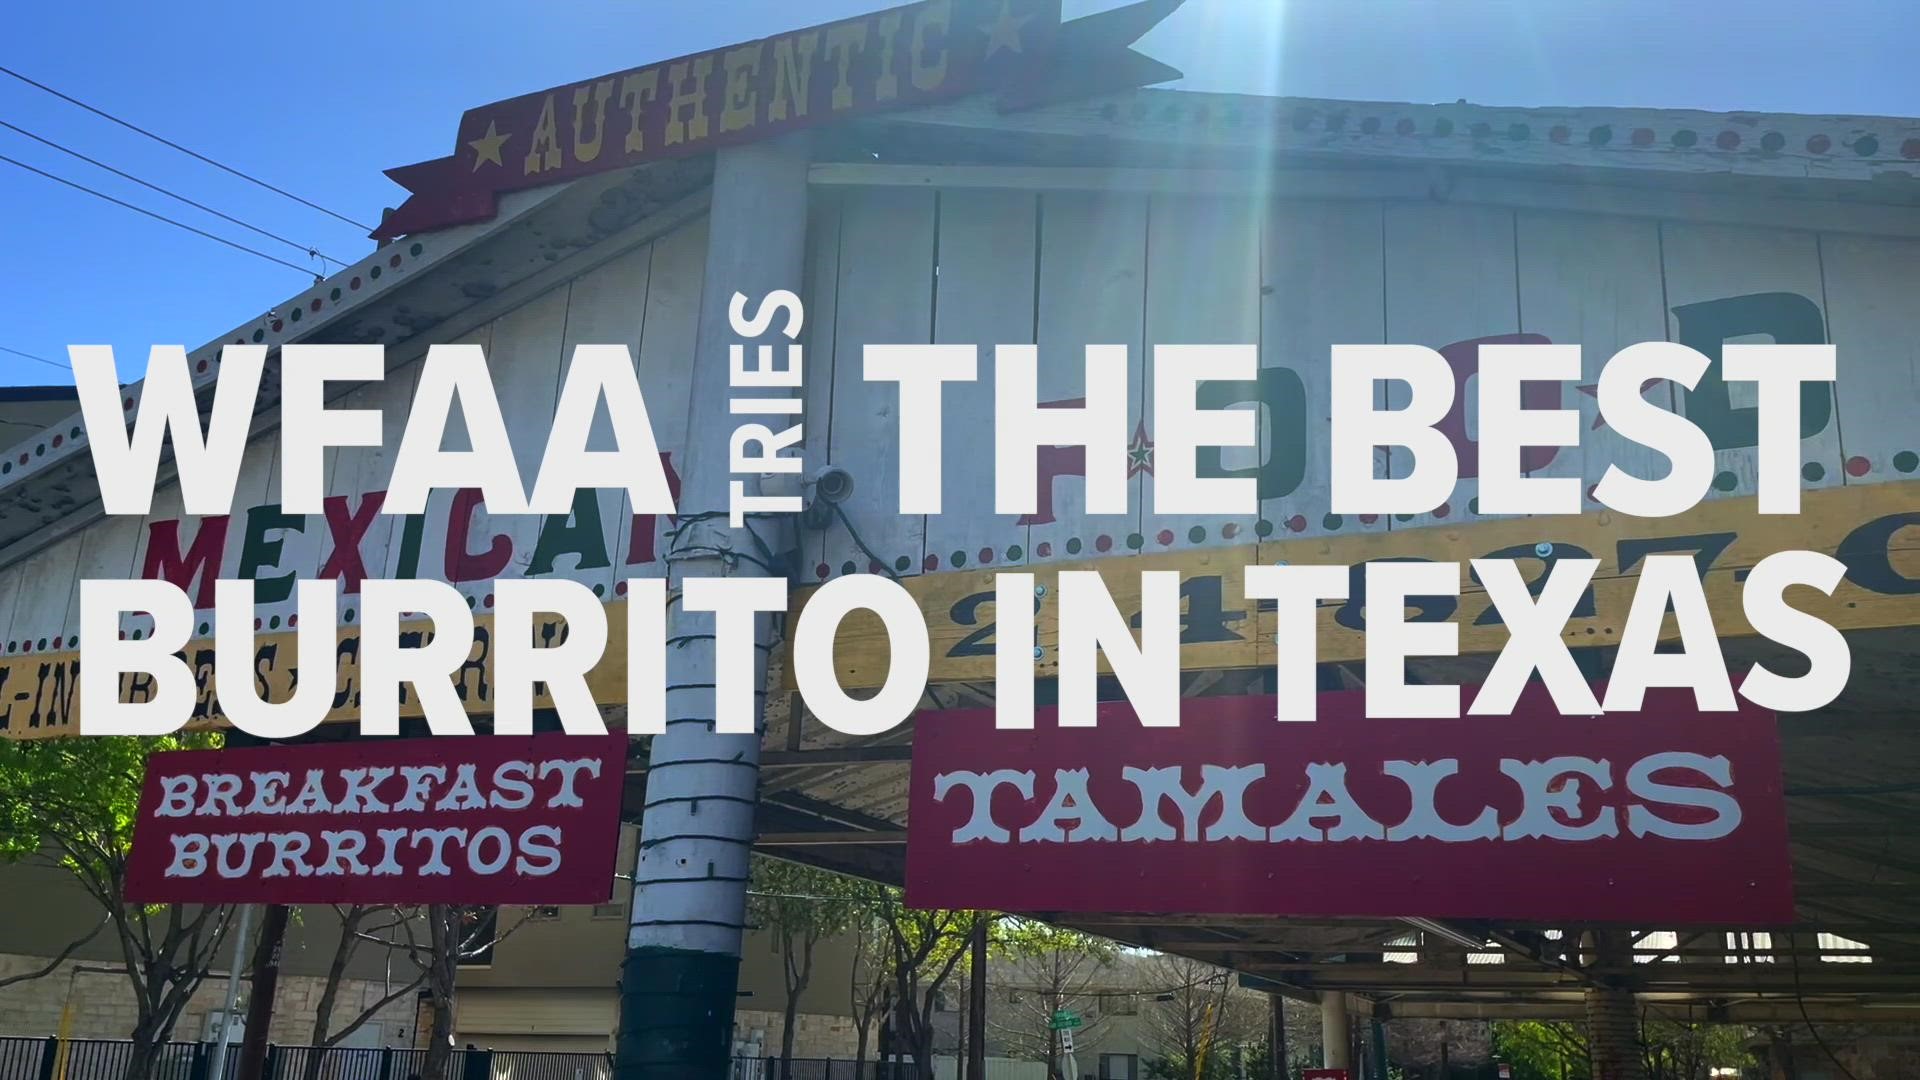 Yelp says the "best burrito in Texas" can be found in Dallas. We had to find out for ourselves.